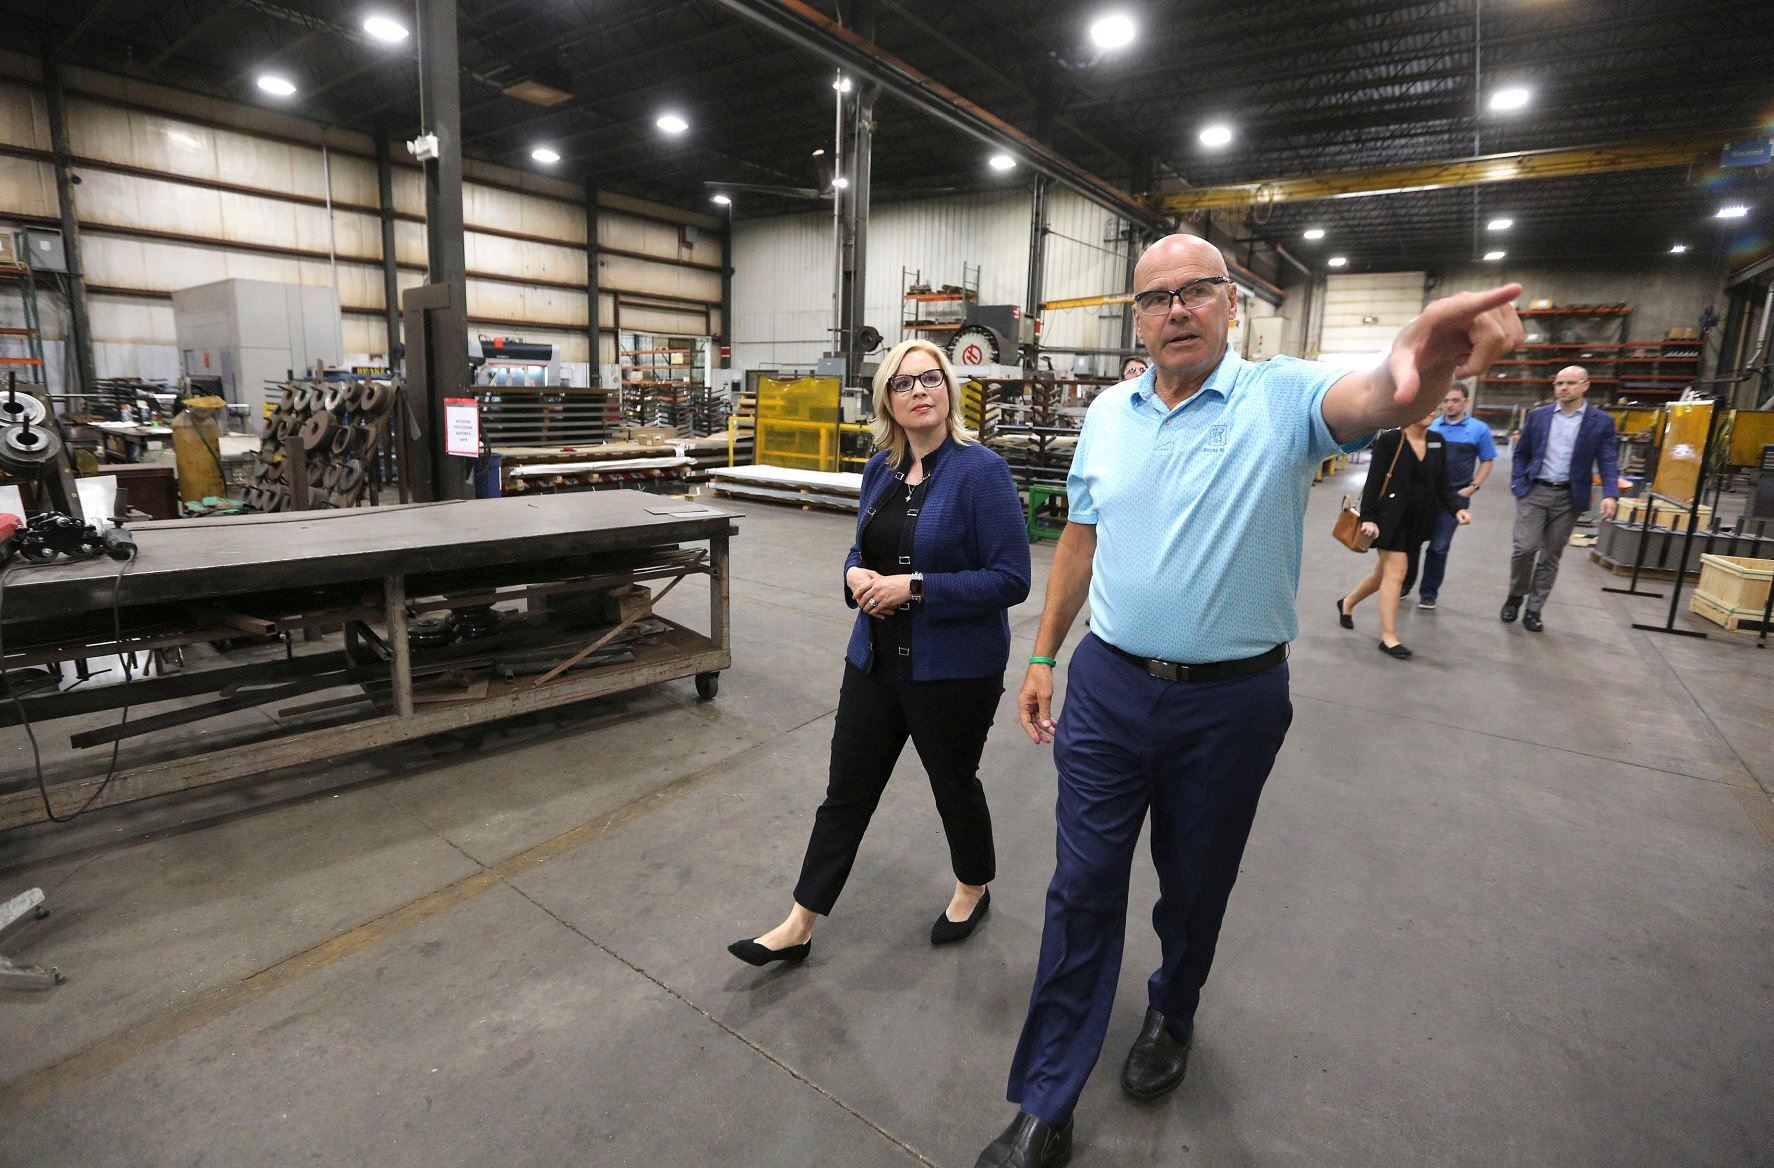 U.S. Rep. Ashley Hinson, R-Iowa, talks with Charlie Giese, president of Giese Companies in Dubuque, during a tour of the manufacturing facility on Monday. Giese said hiring workers is difficult and more could be done to promote the trades.    PHOTO CREDIT: Dave Kettering